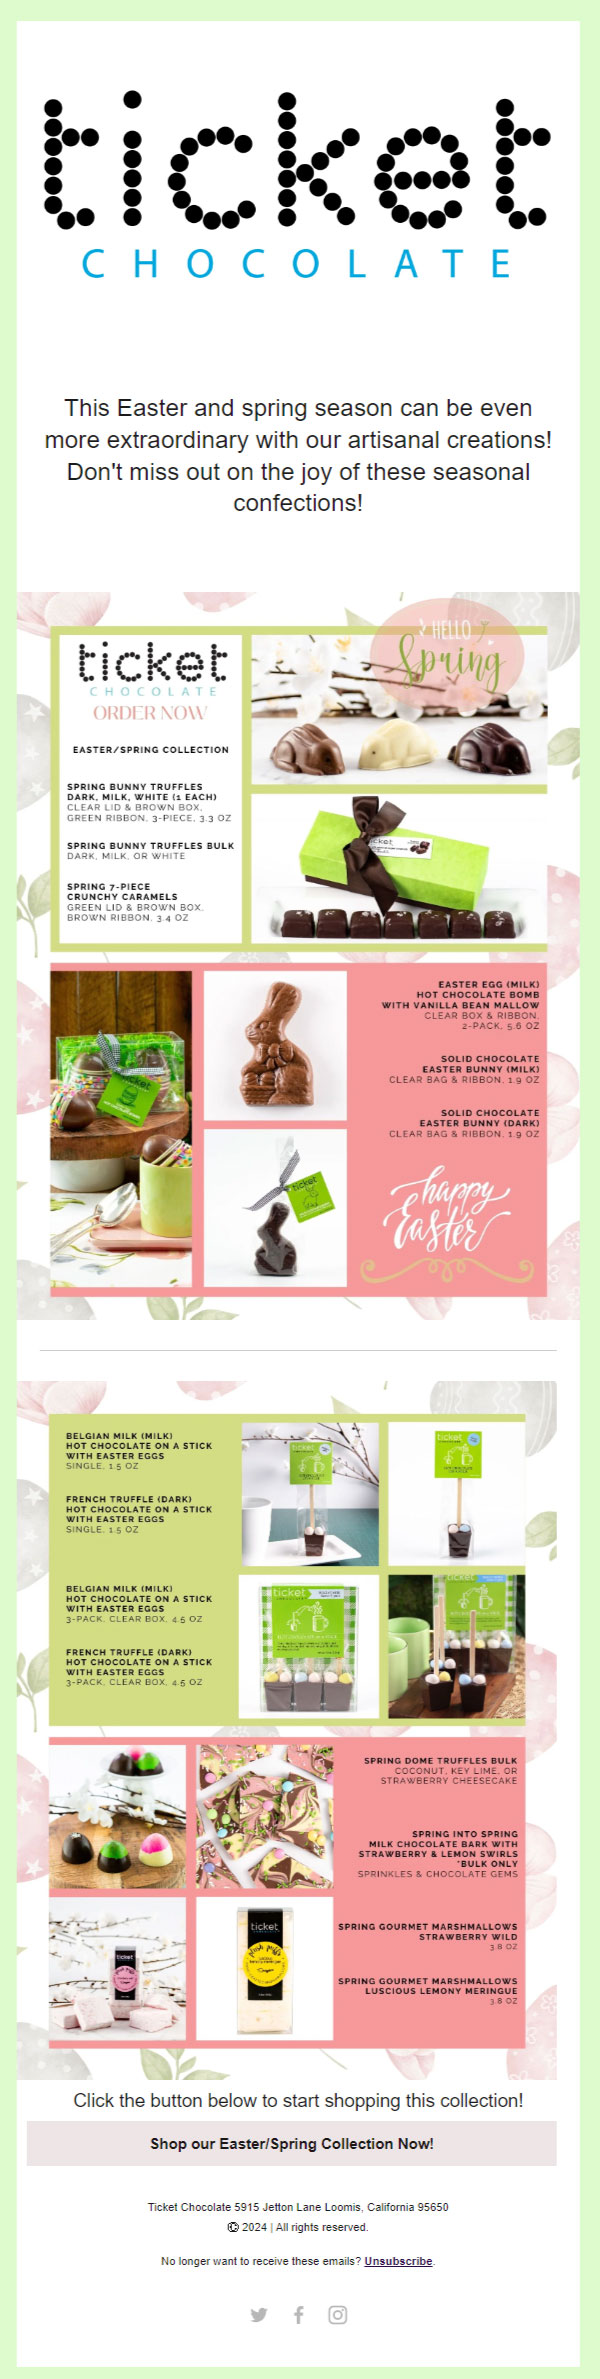 Ticket Chocolate- Easter email